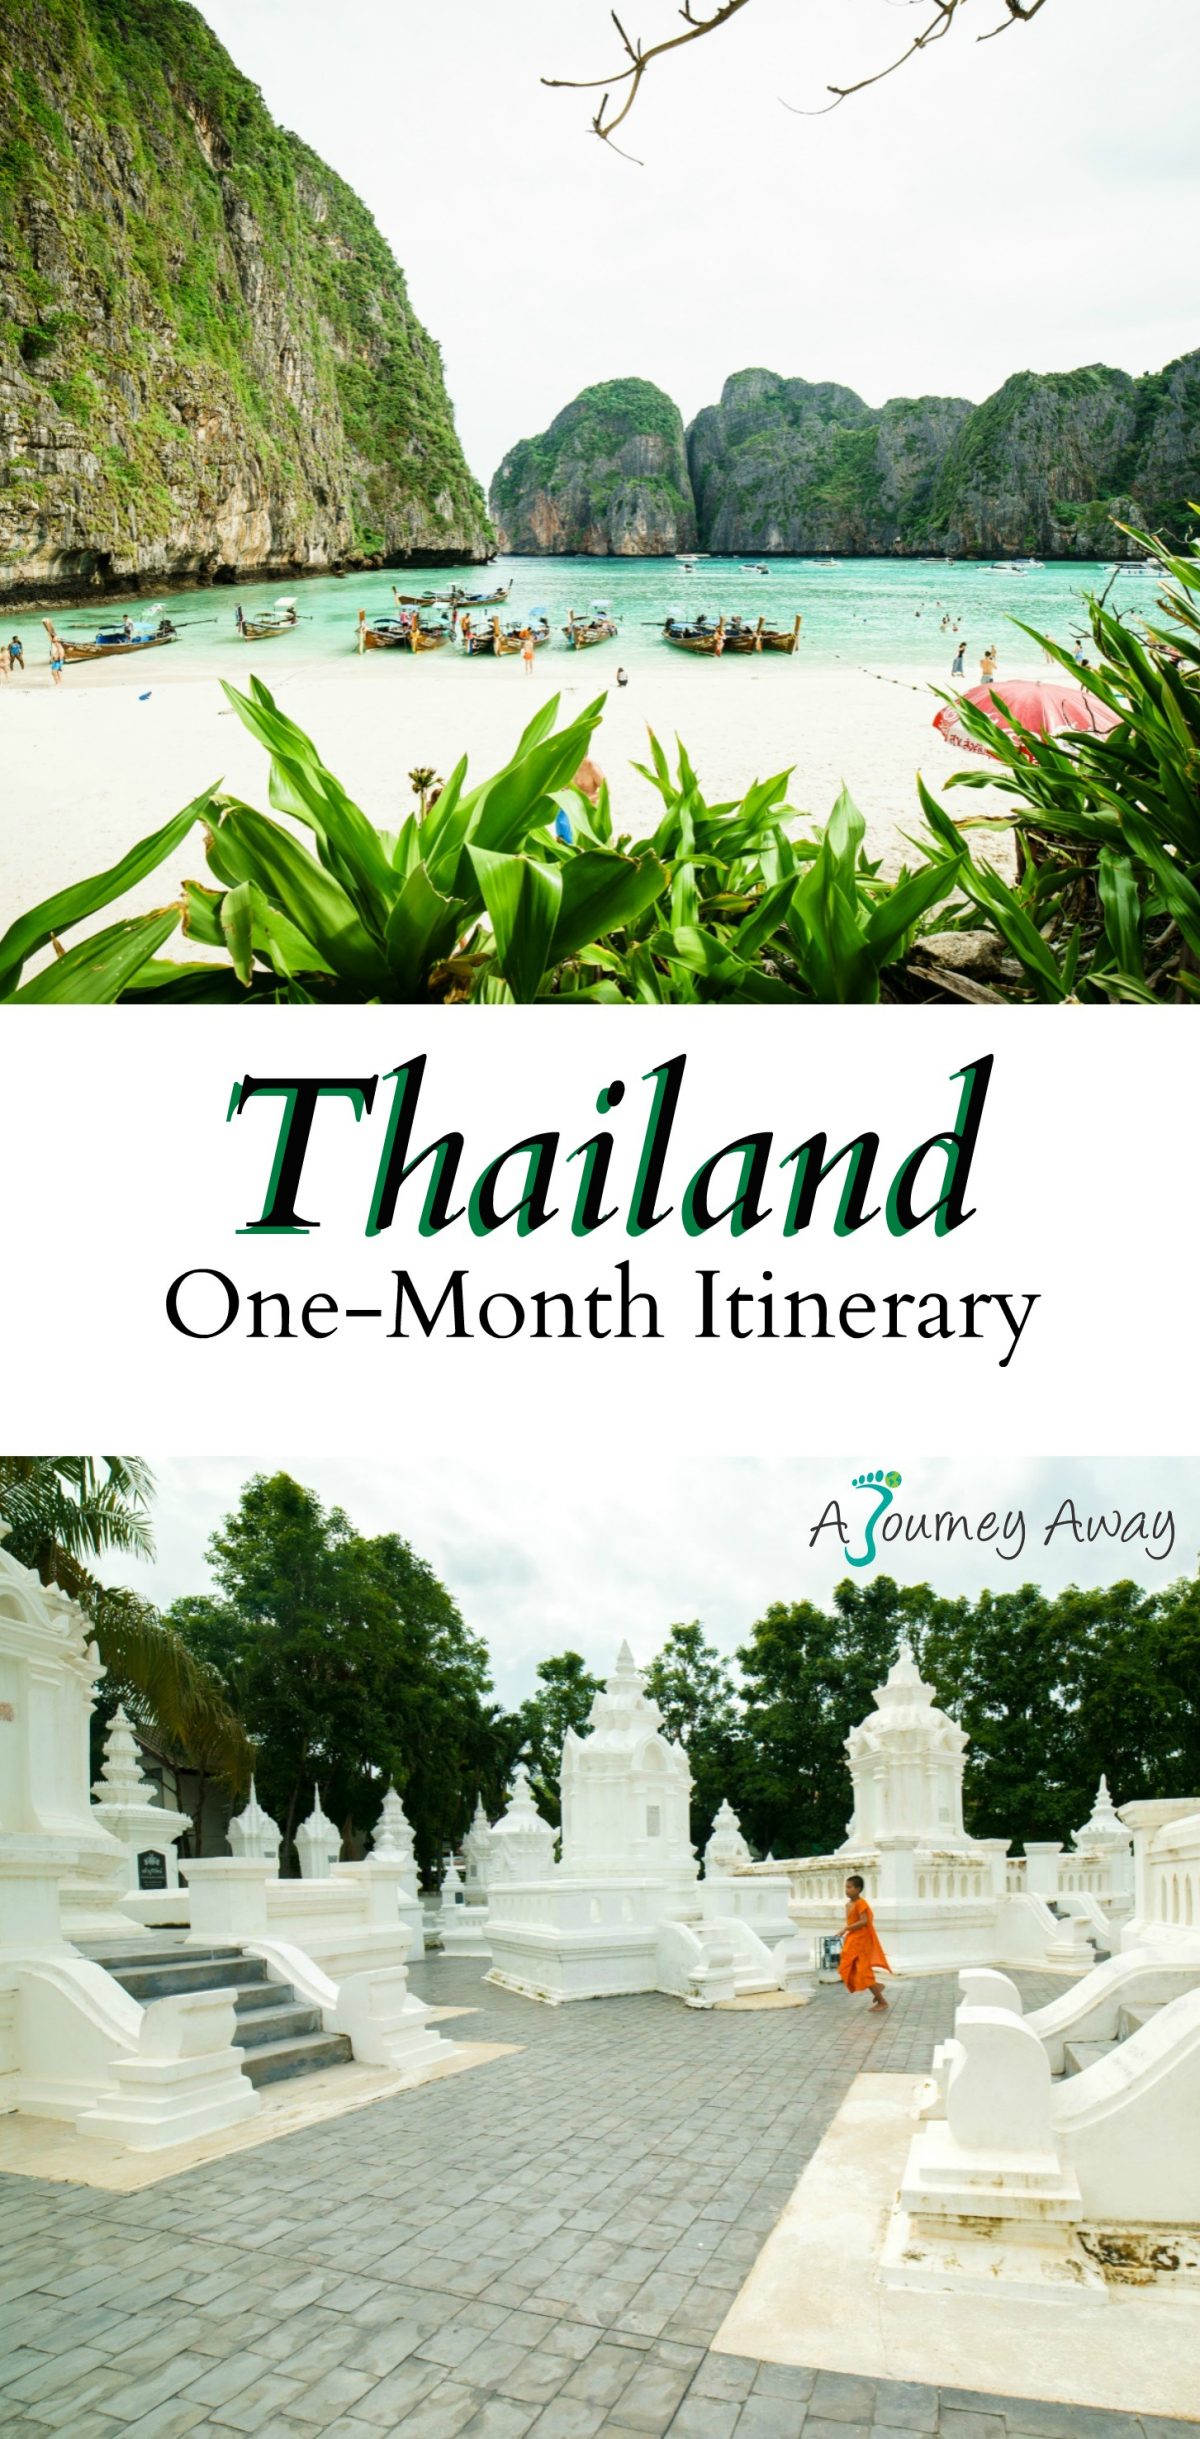 One-Month Itinerary in Thailand | A Journey Away travel blog